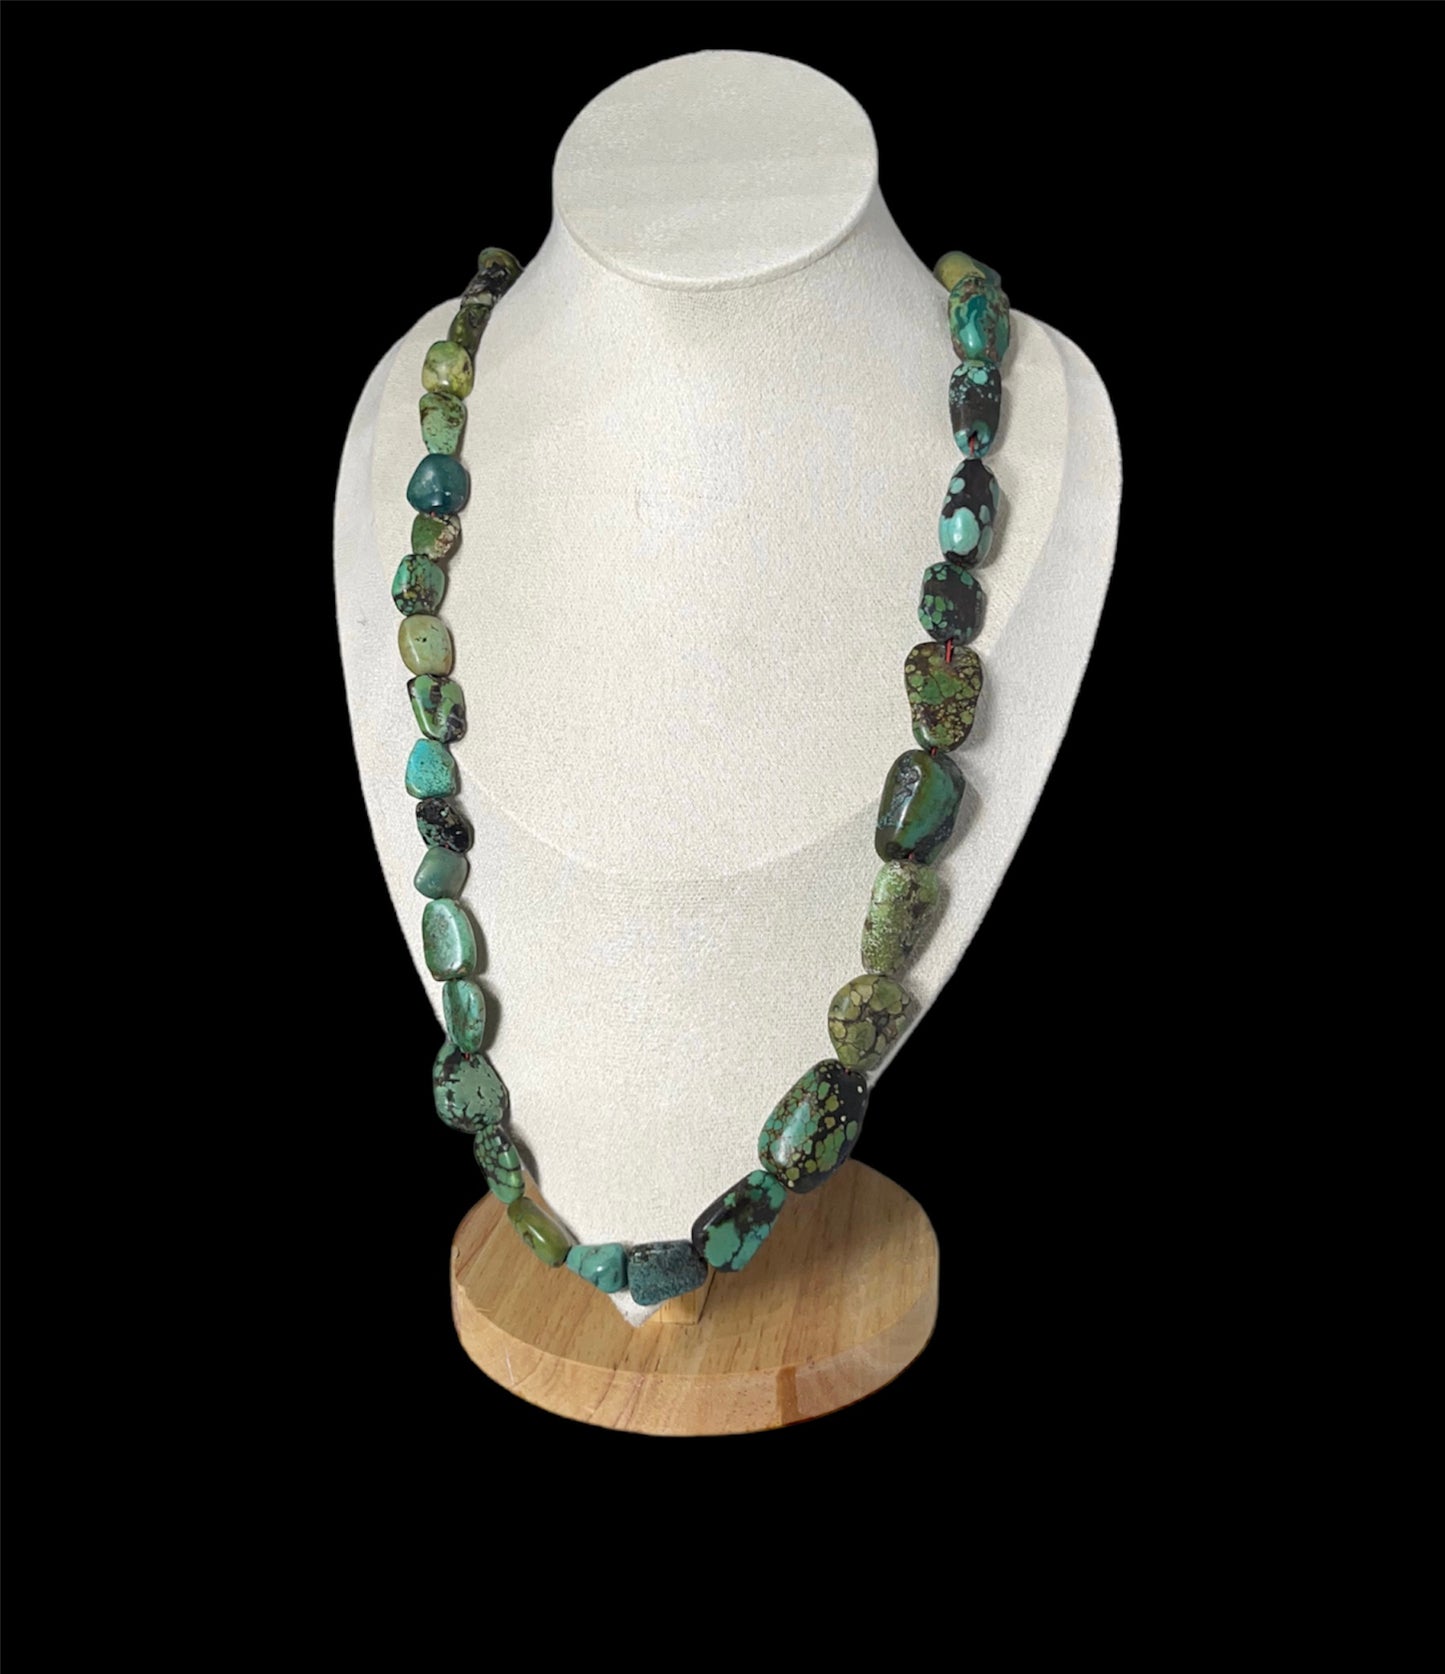 A necklace with antique Tibetan turquoise from an antique Perak